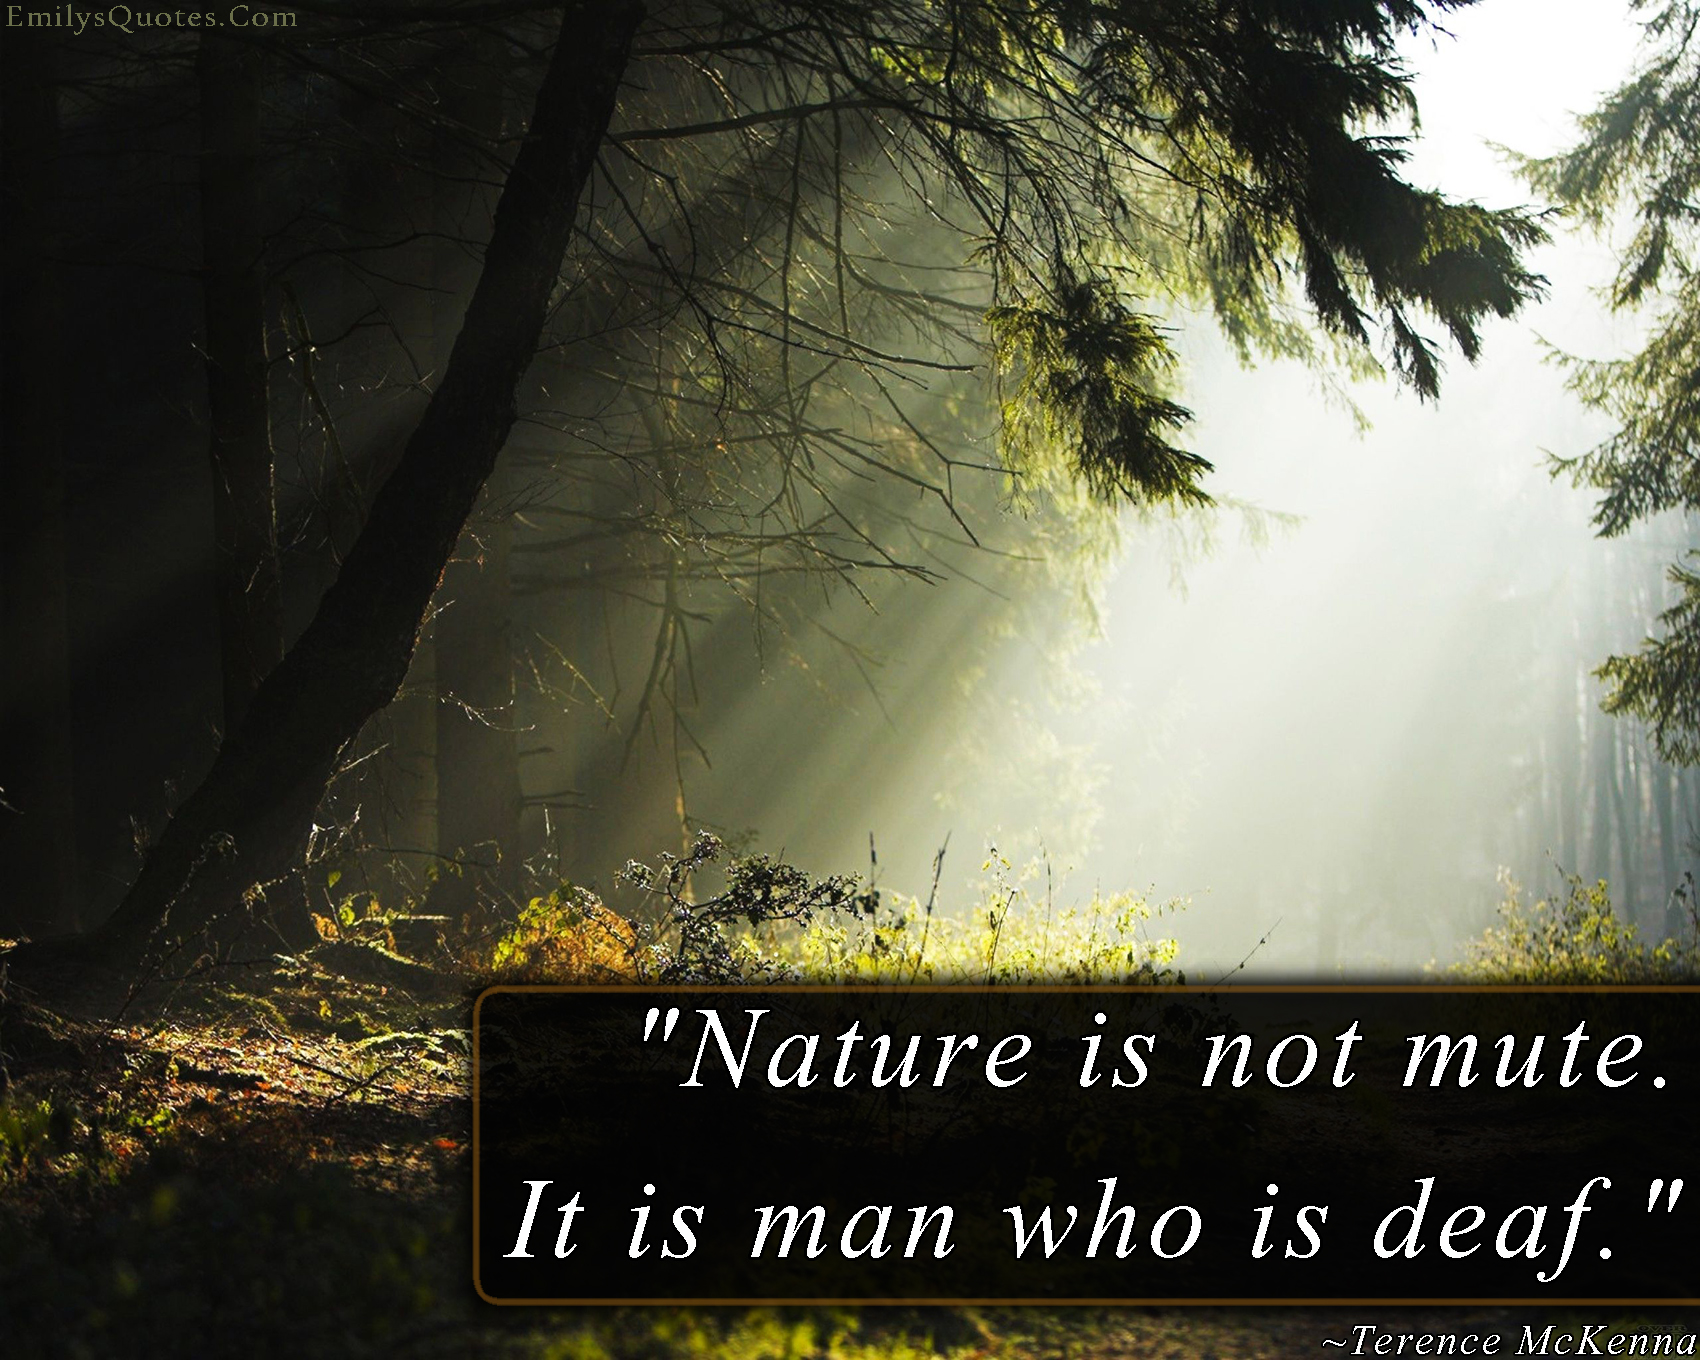 Nature is not mute. It is man who is deaf